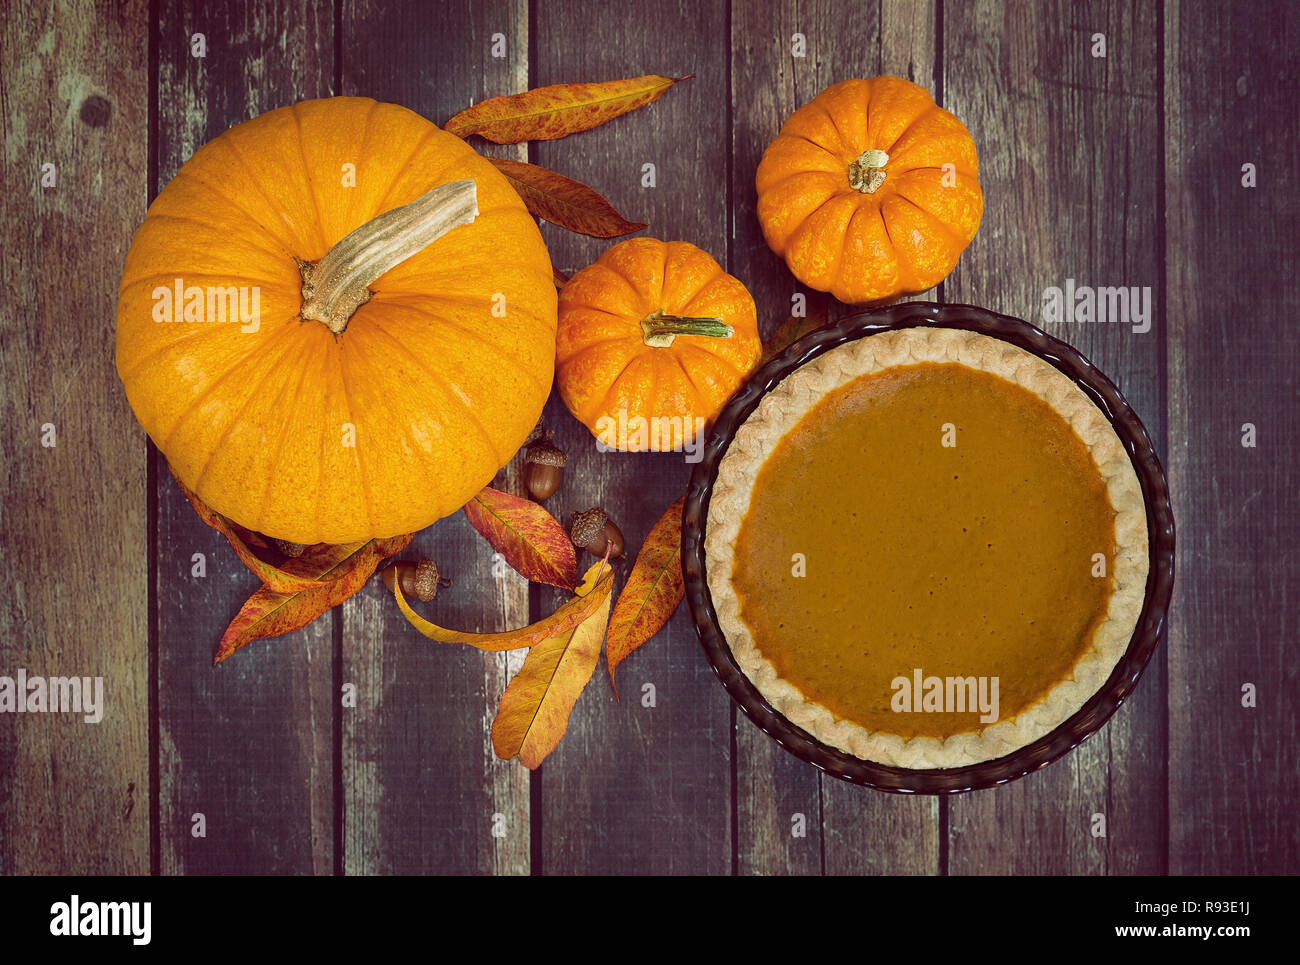 Pumpkin pie displayed with pumpkins, golden autumn leaves, and acorns on rustic wooden table. Top view. Stock Photo